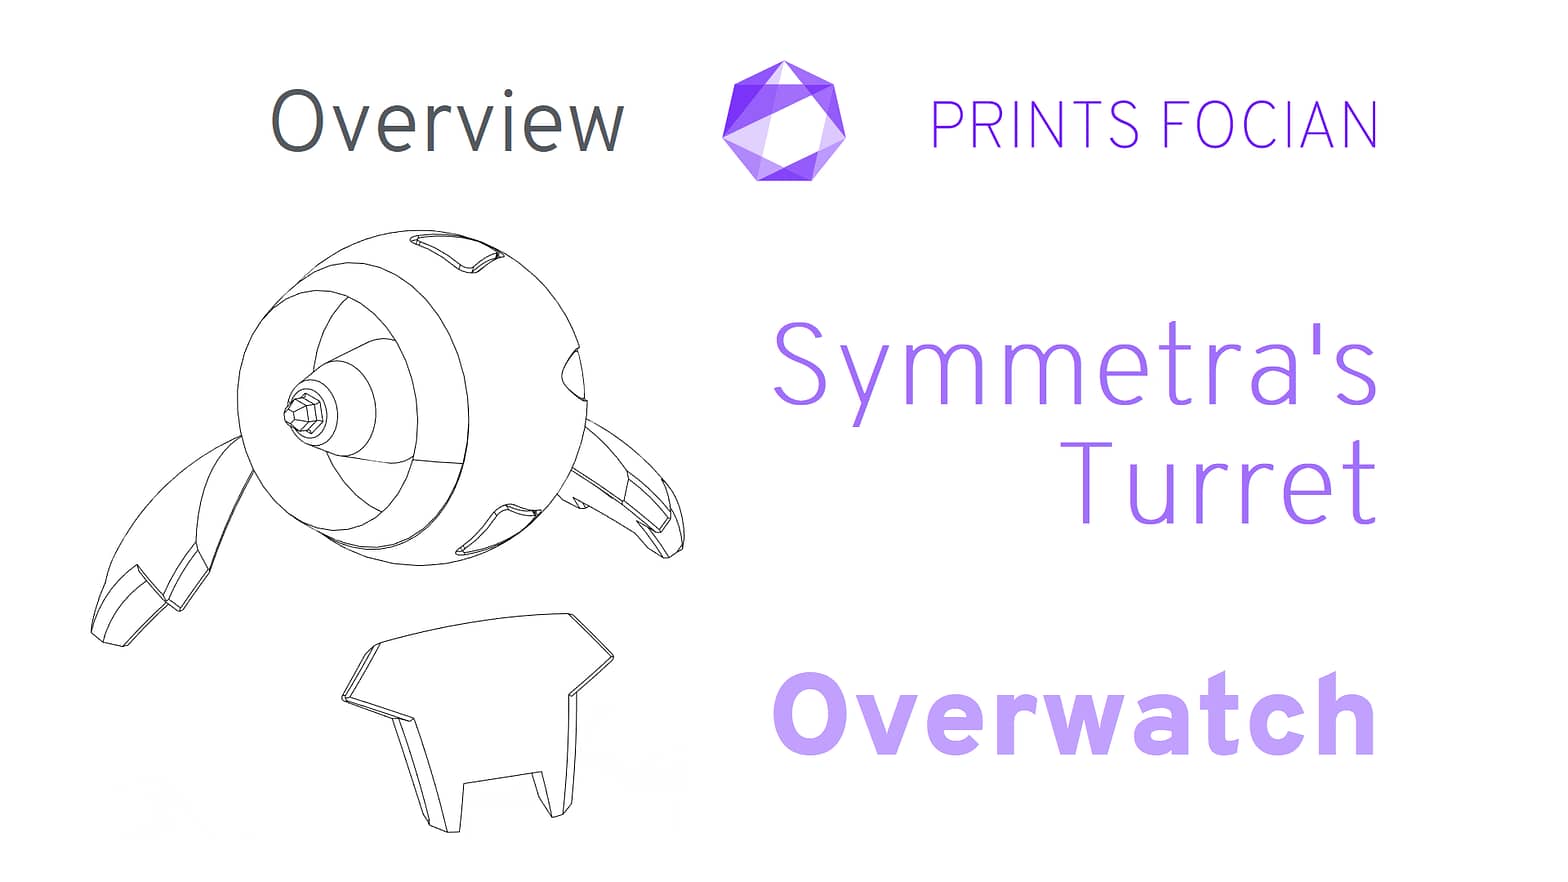 Wireframe image of Symmetra's Turret on a white background. Prints Focian Icon top and central. Text: Purple Prints Focian, Symmetra's Turret, Overwatch and dark grey Overview